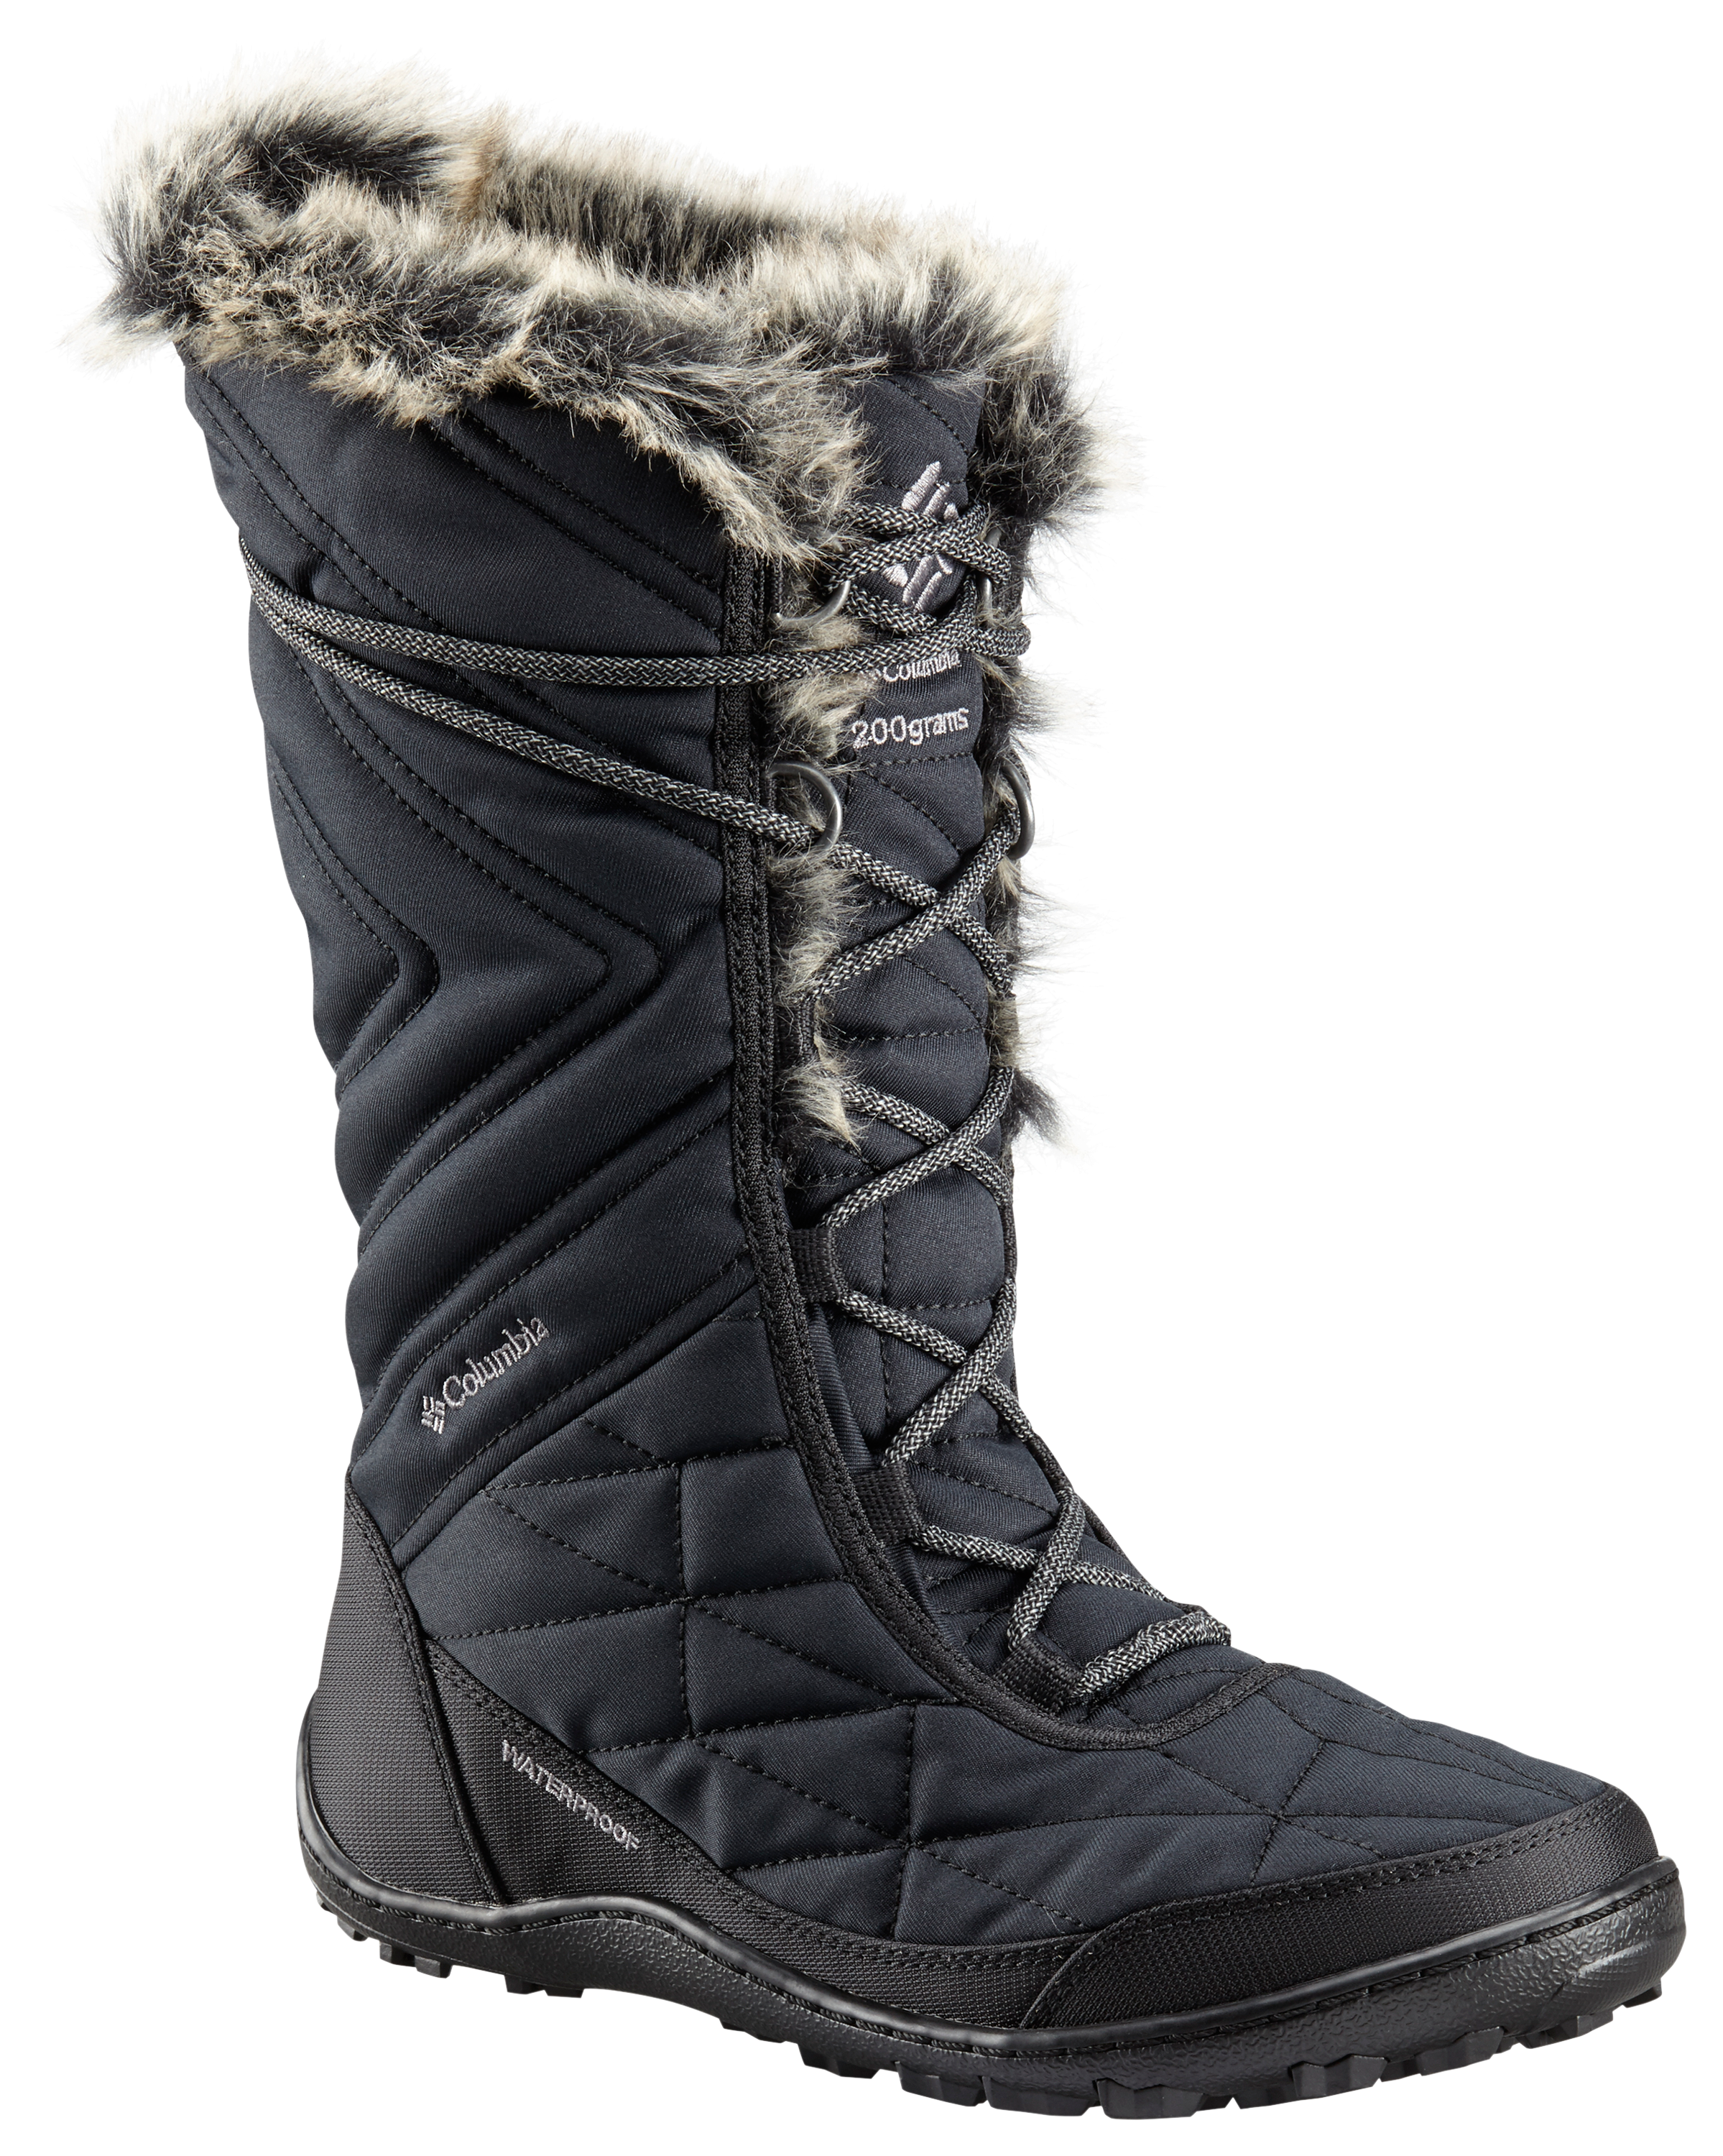 Columbia Minx Mid 3 Pac Boots for Ladies | Cabela's